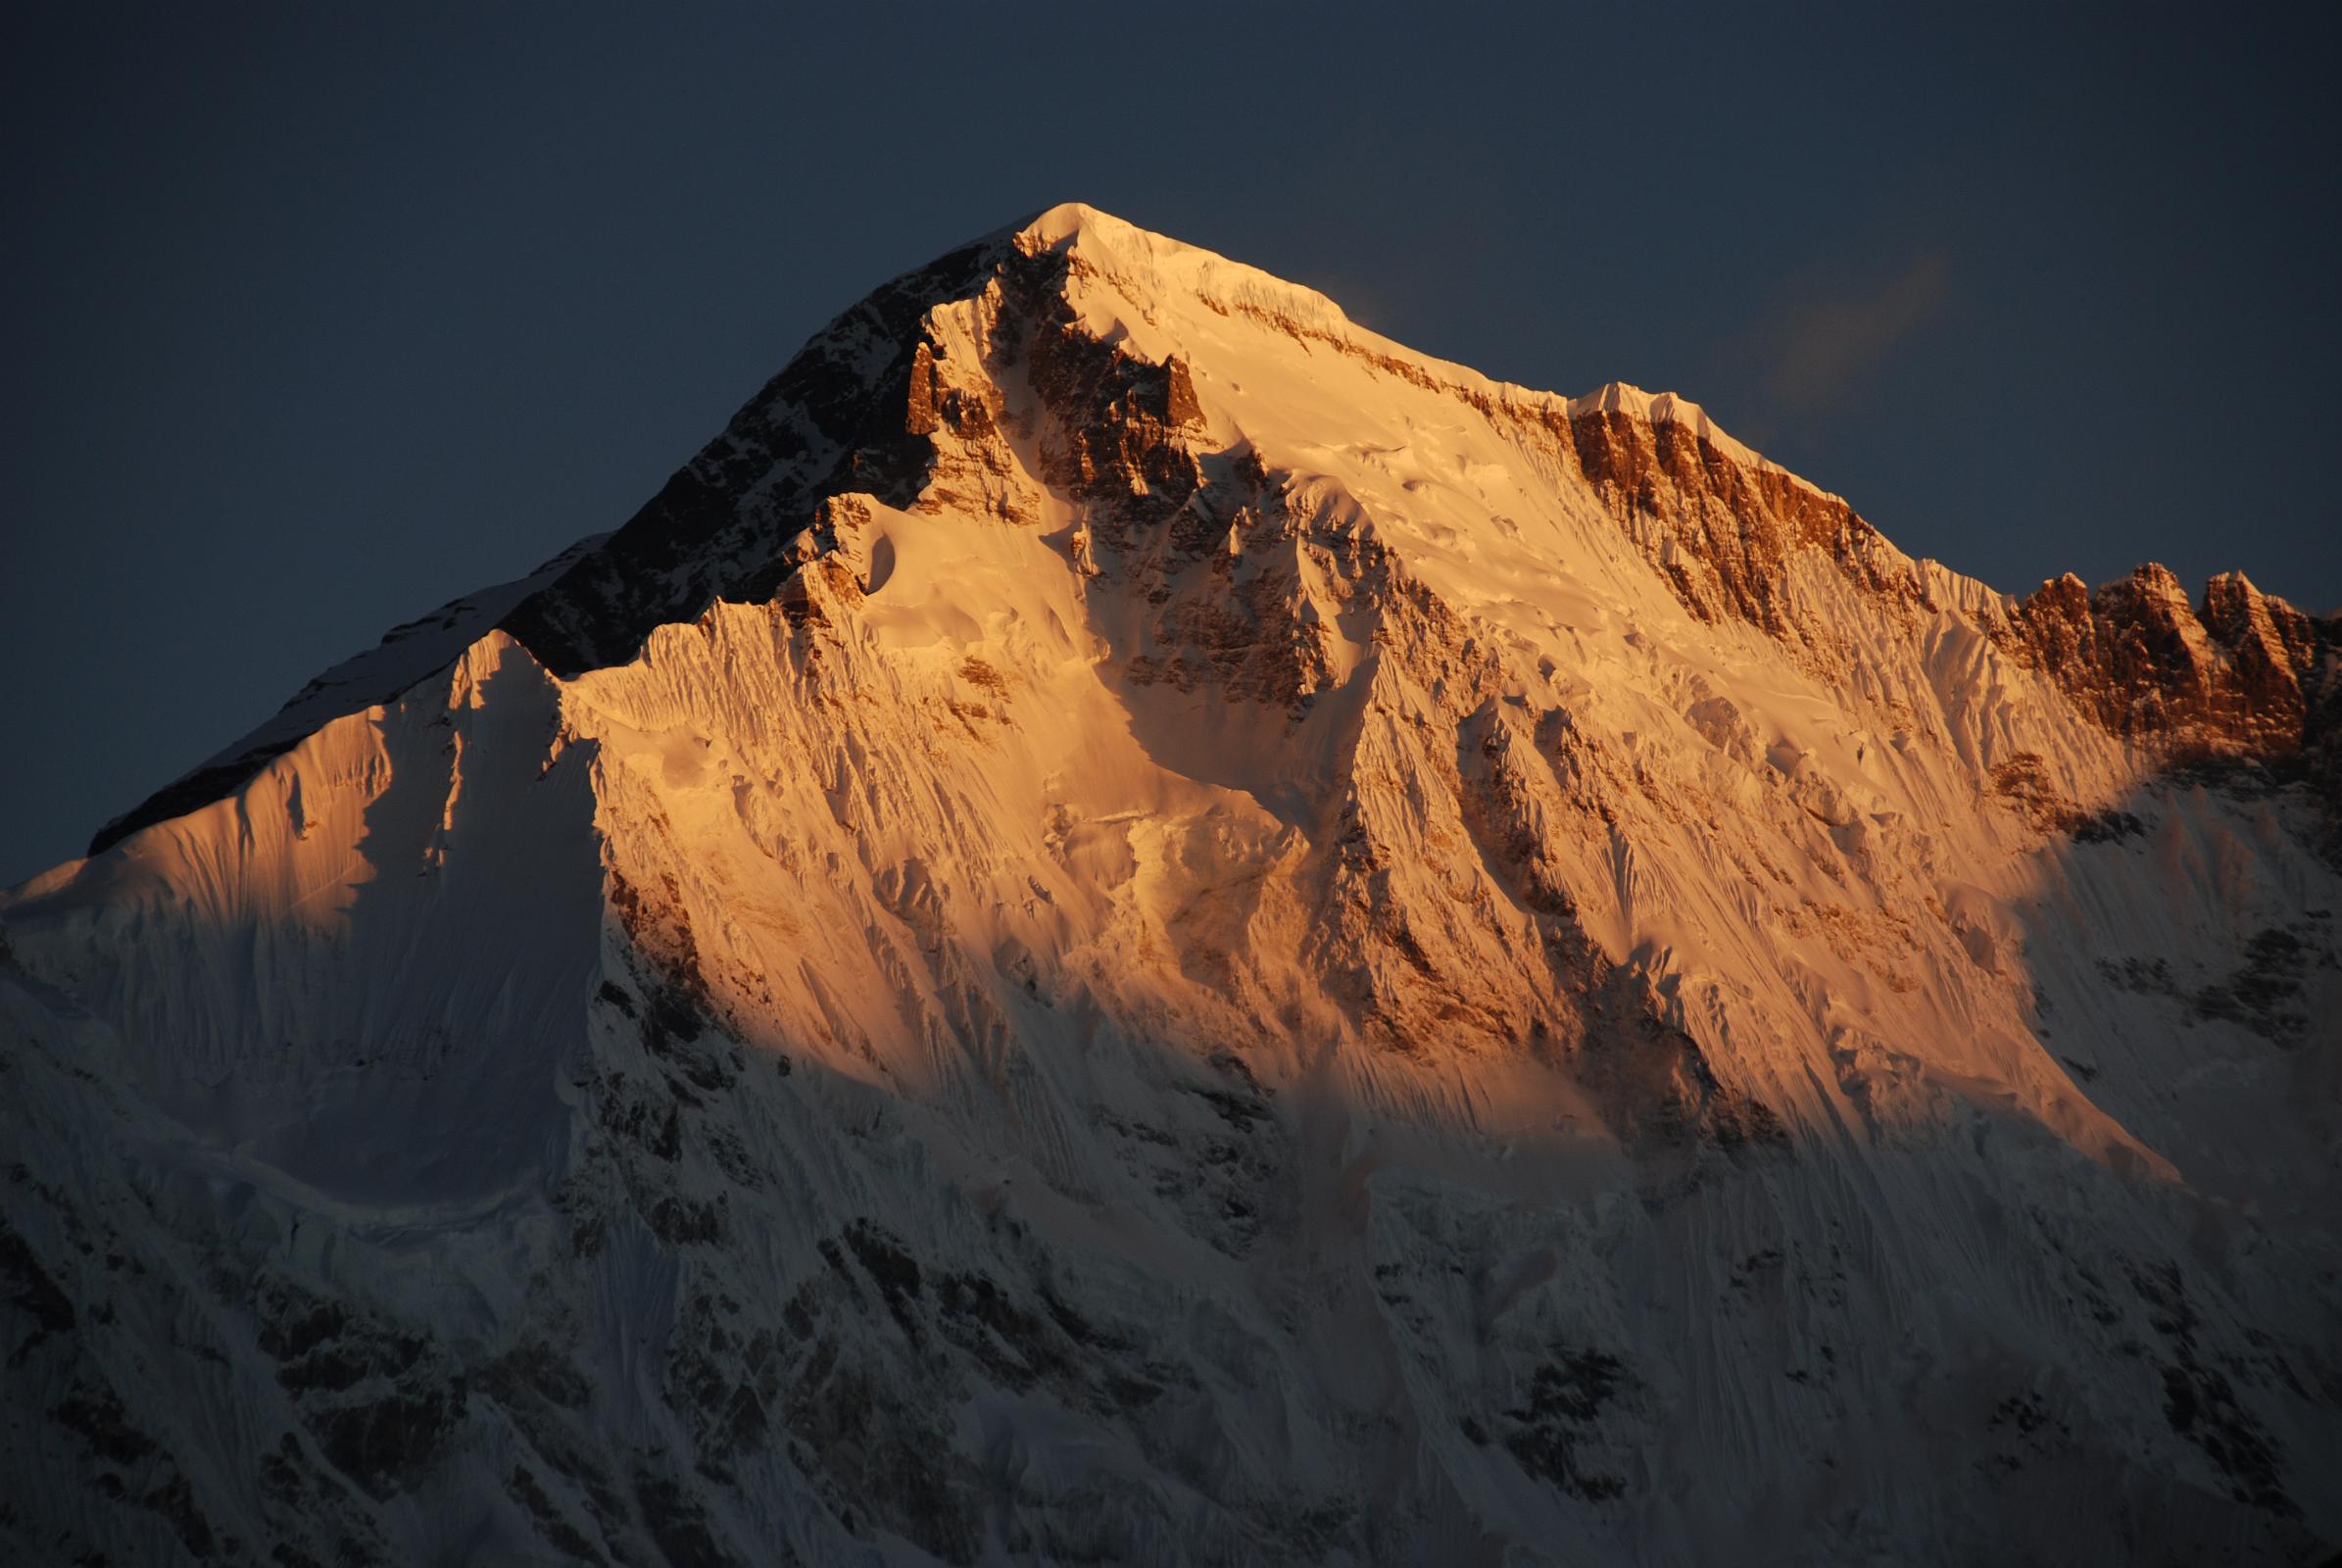 01 Gokyo 3 1 Cho Oyu At Sunrise Close Up From Gokyo The sun slowly descends the south face of Cho Oyu (8201m), the sixth highest mountain in the world, at sunrise from Gokyo, turning the colour of the face from a golden yellow to extremely bright white within a few minutes.